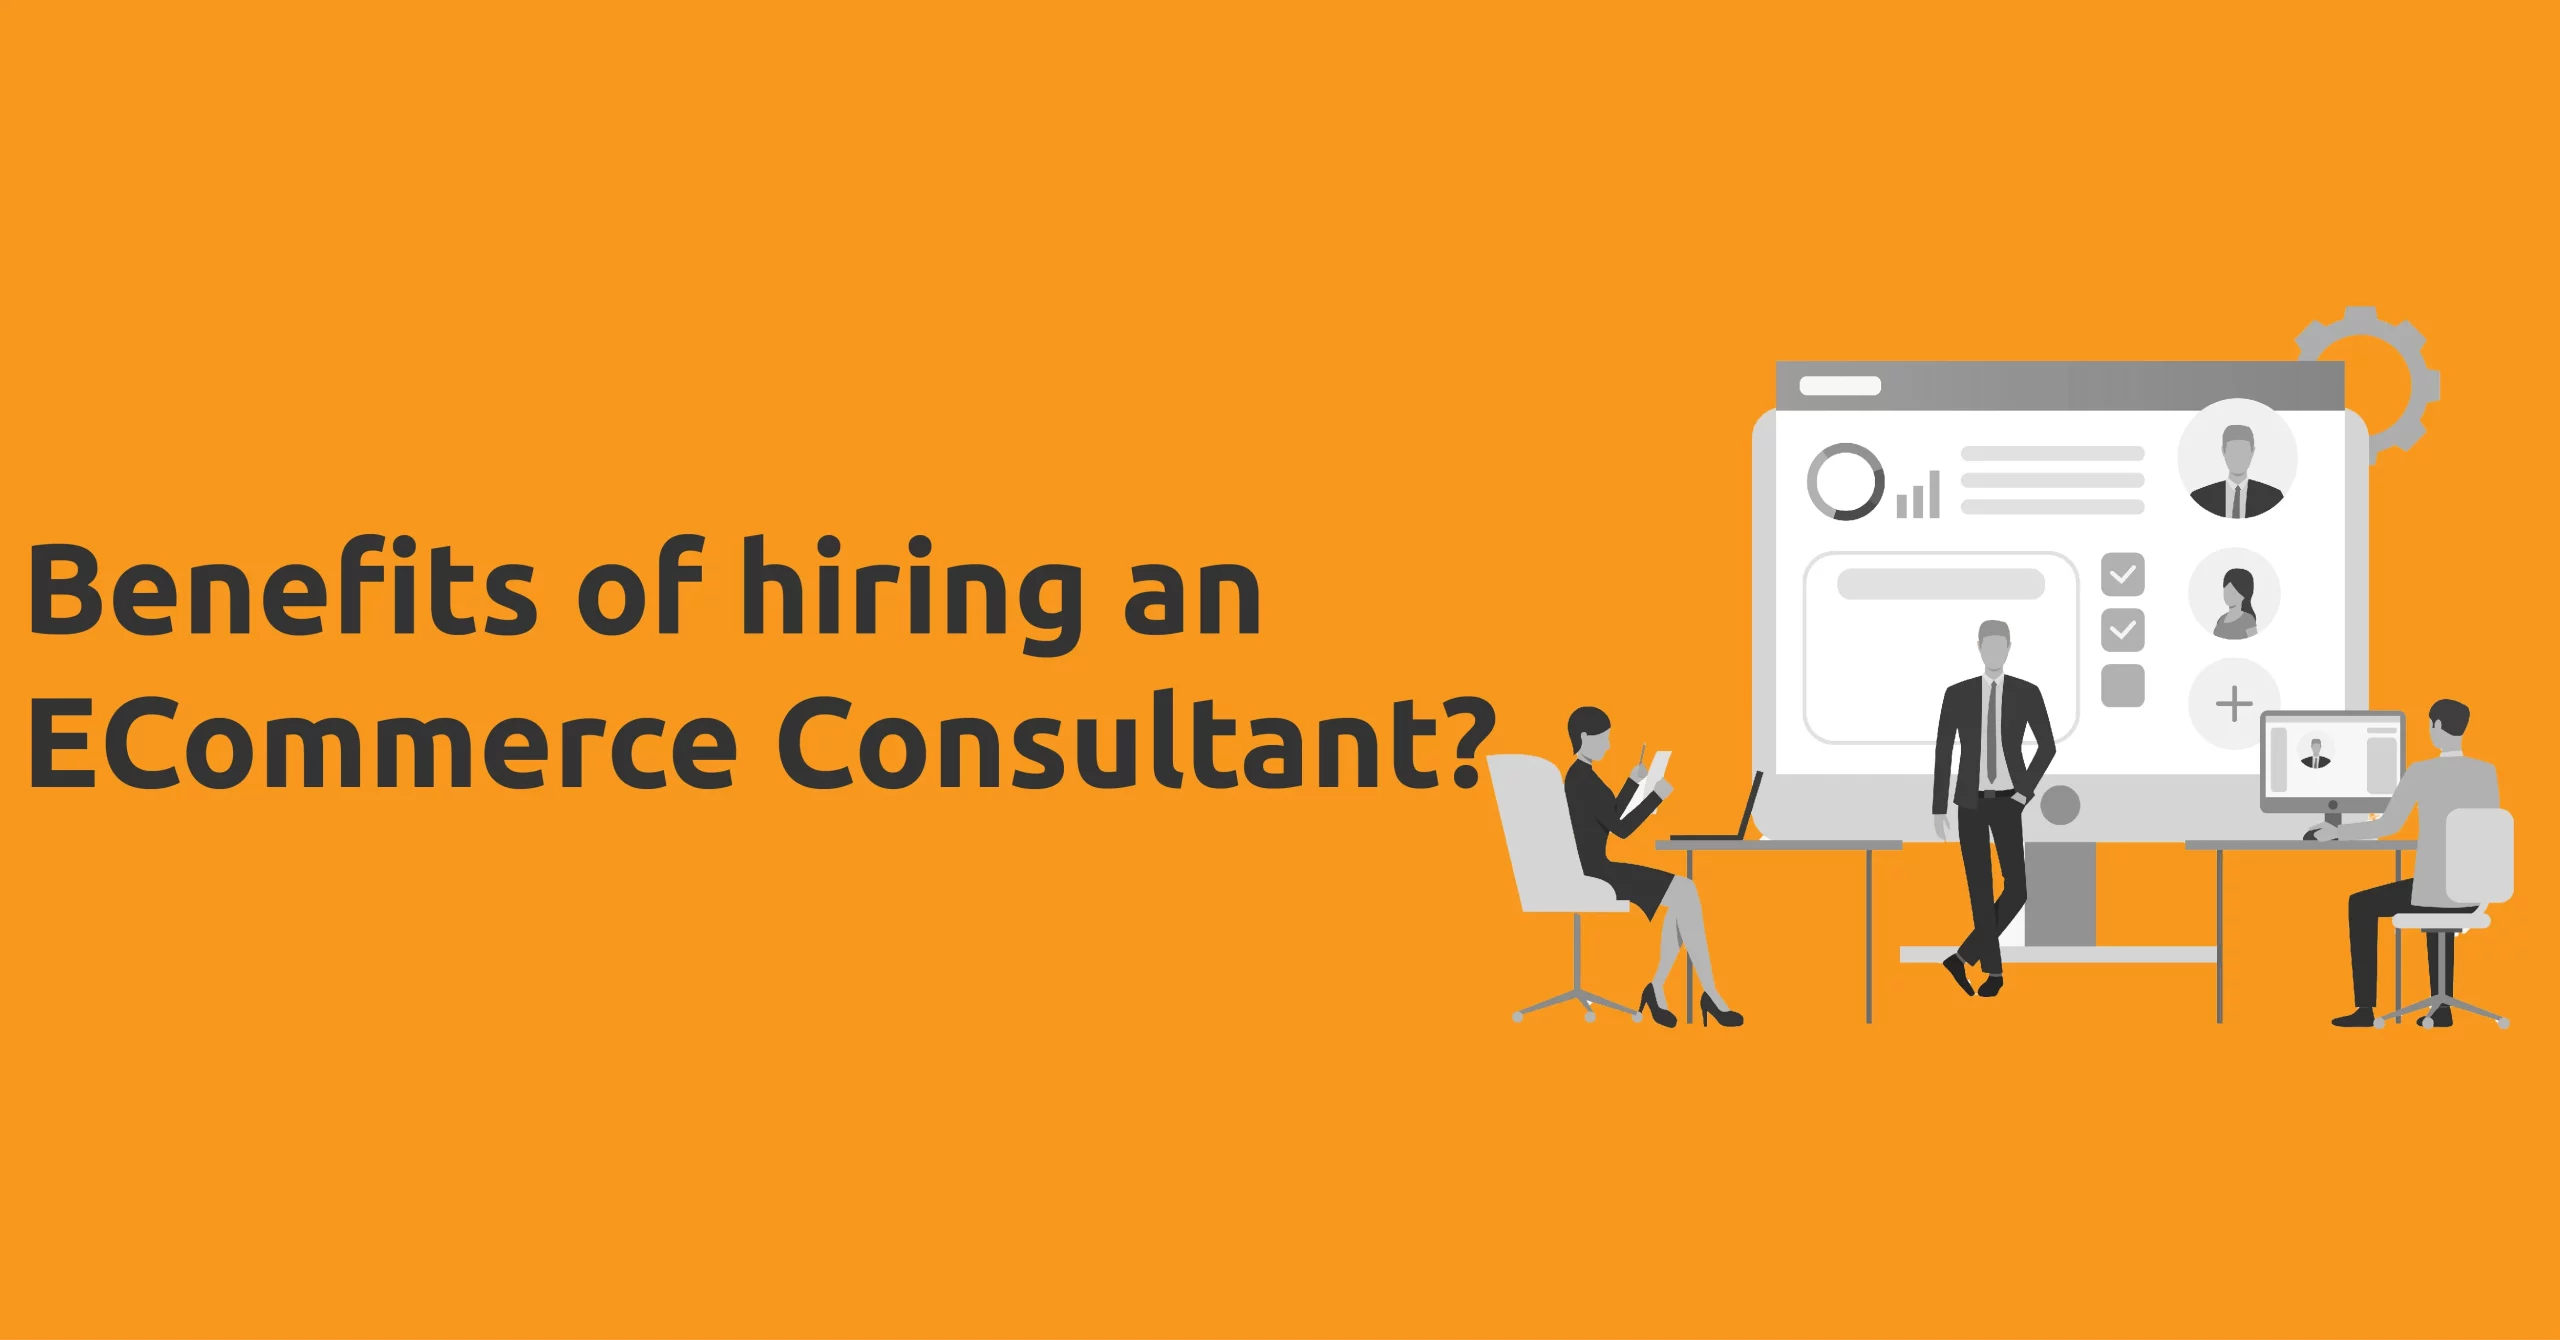 Image representing the benefits of hiring an ecommerce consultant for online business growth.